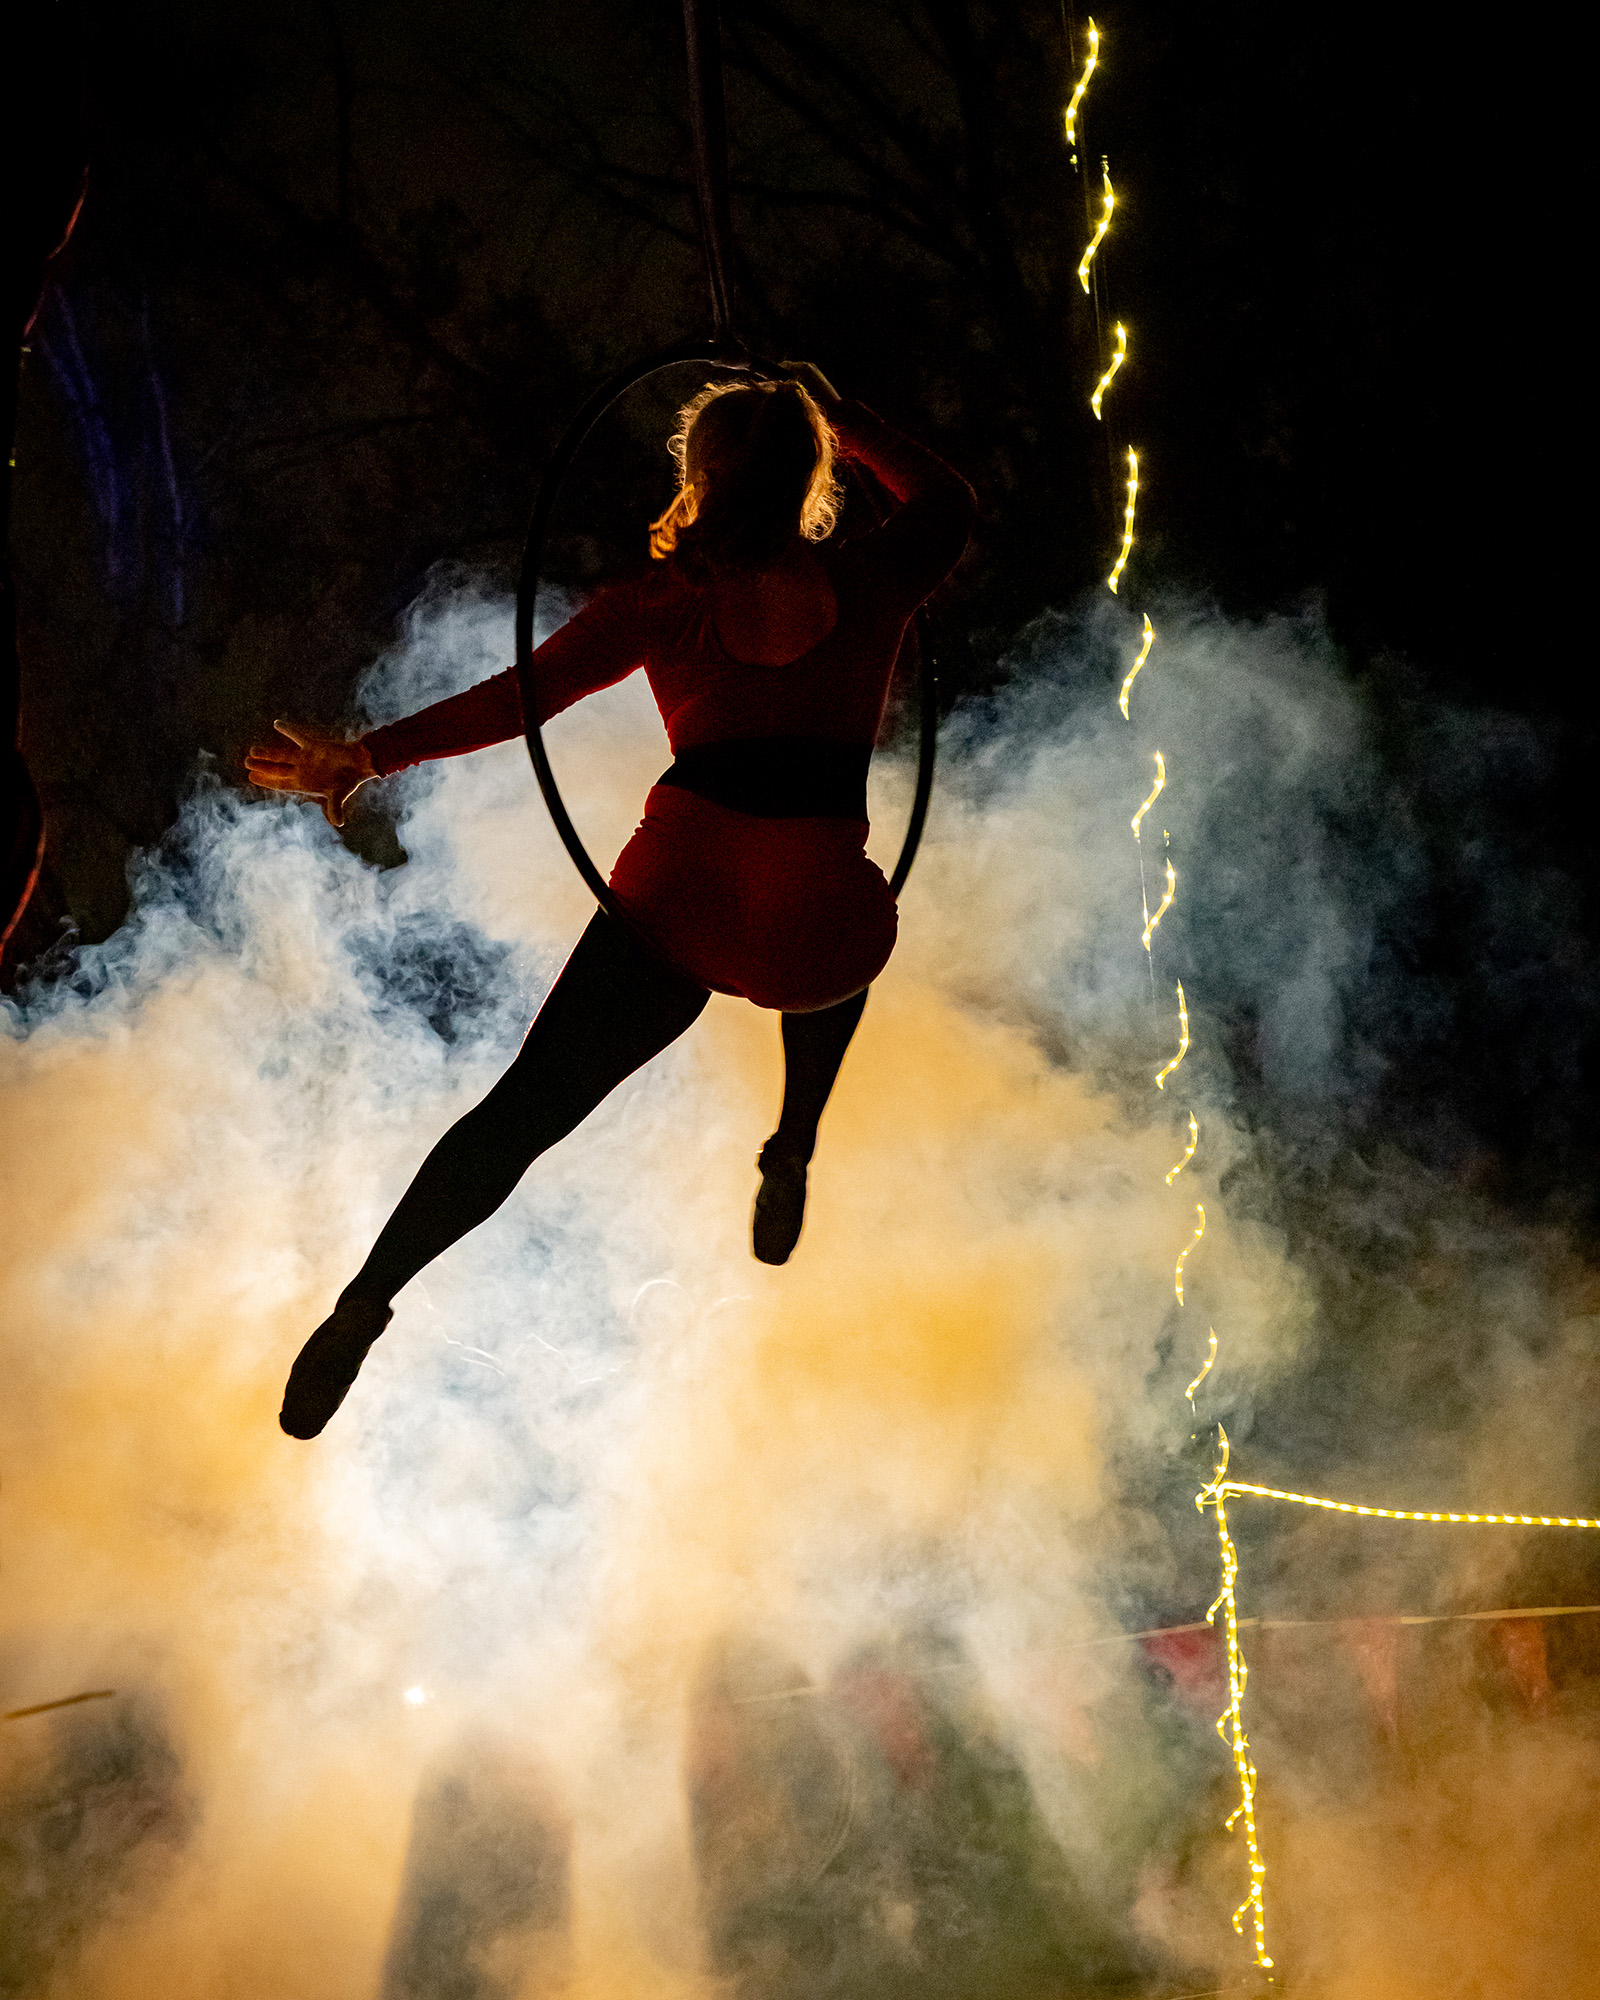 aerialist performs above a foggy ground